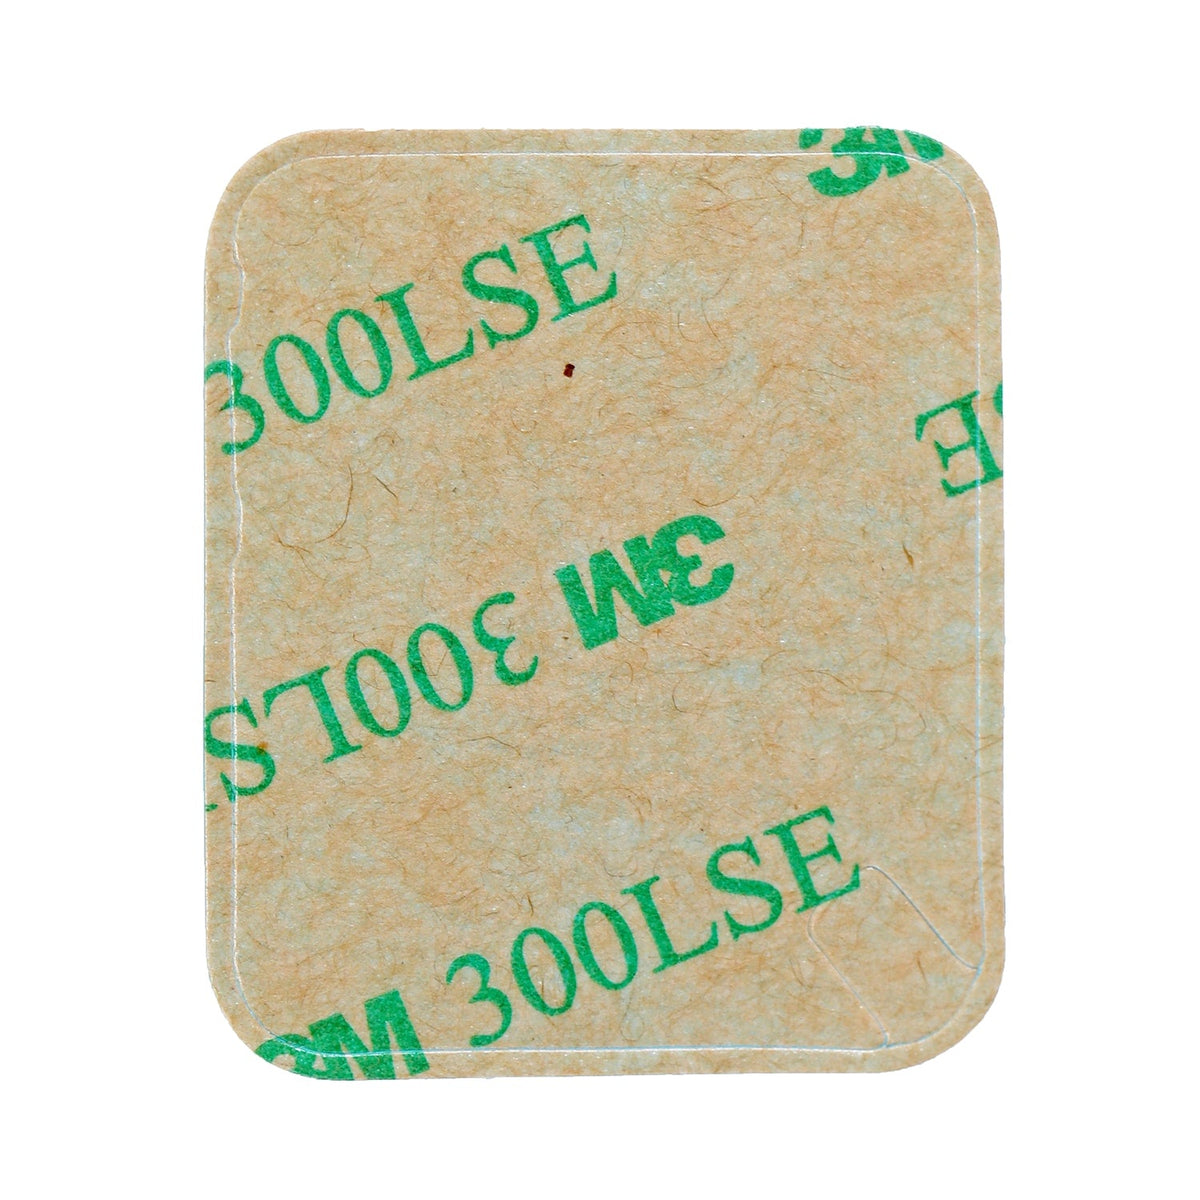 LCD STICKER ADHESIVE TAPE FOR APPLE WATCH S1 42MM